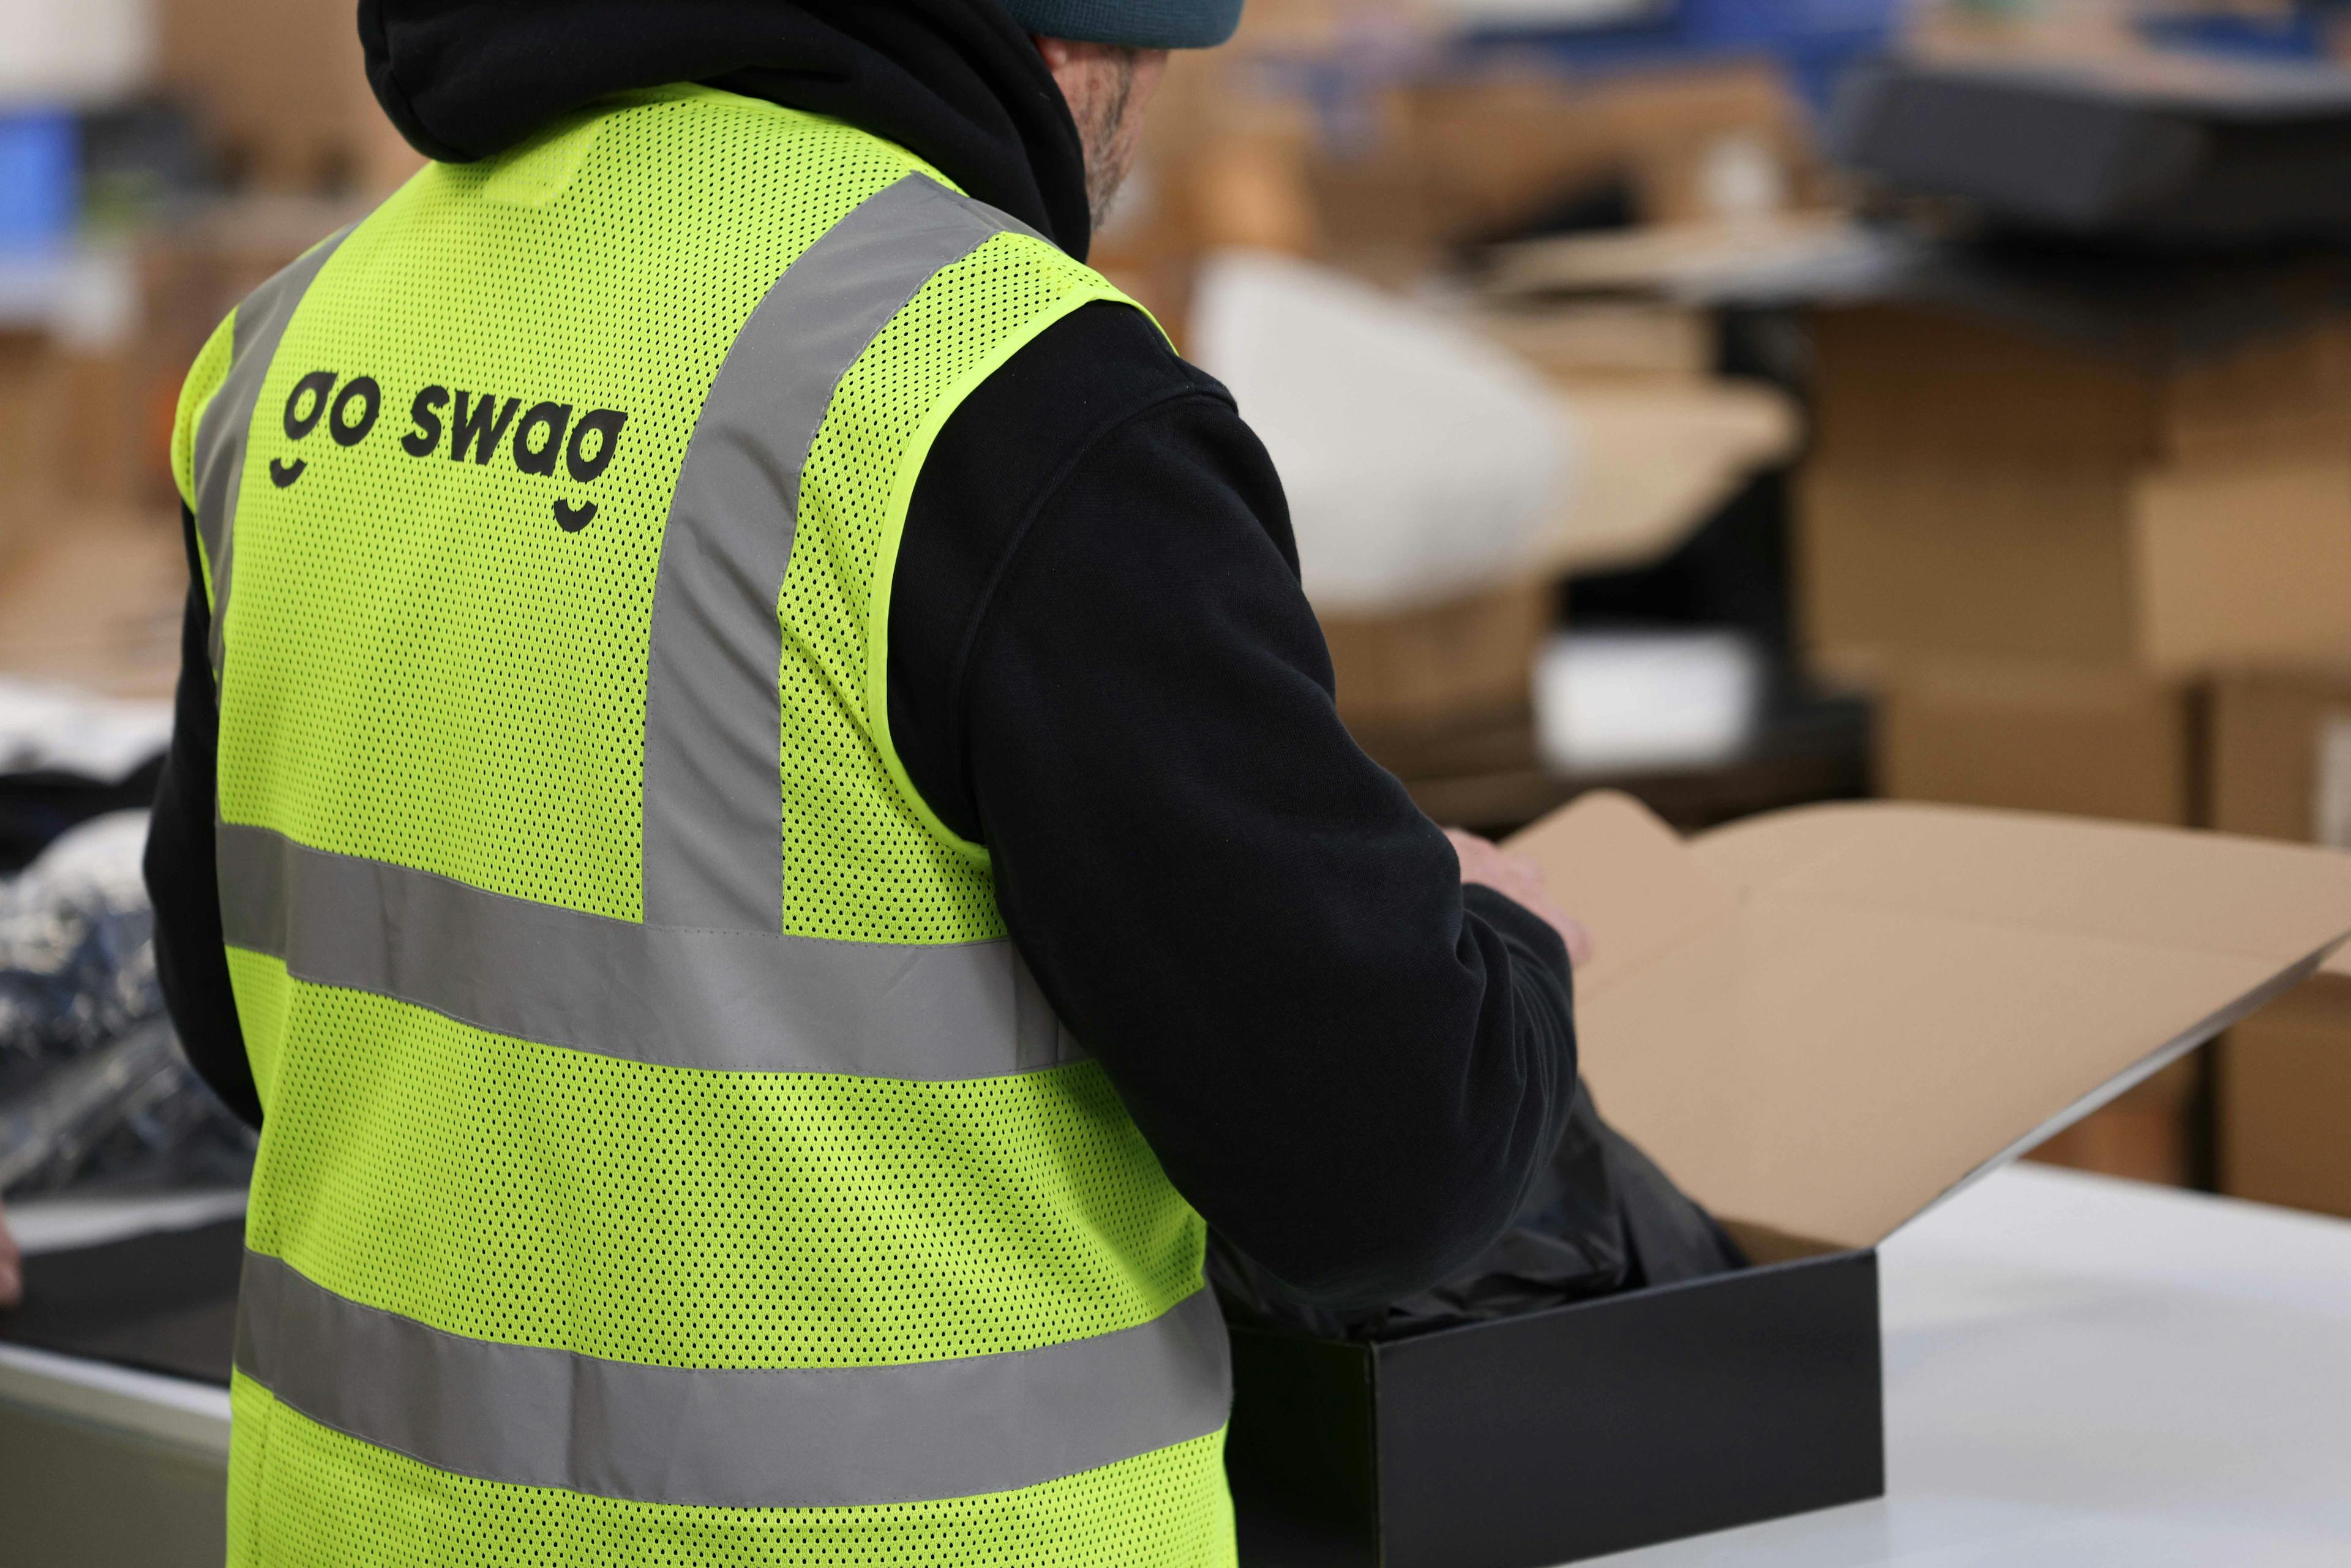 Photograph of a warehouse worker with a pack